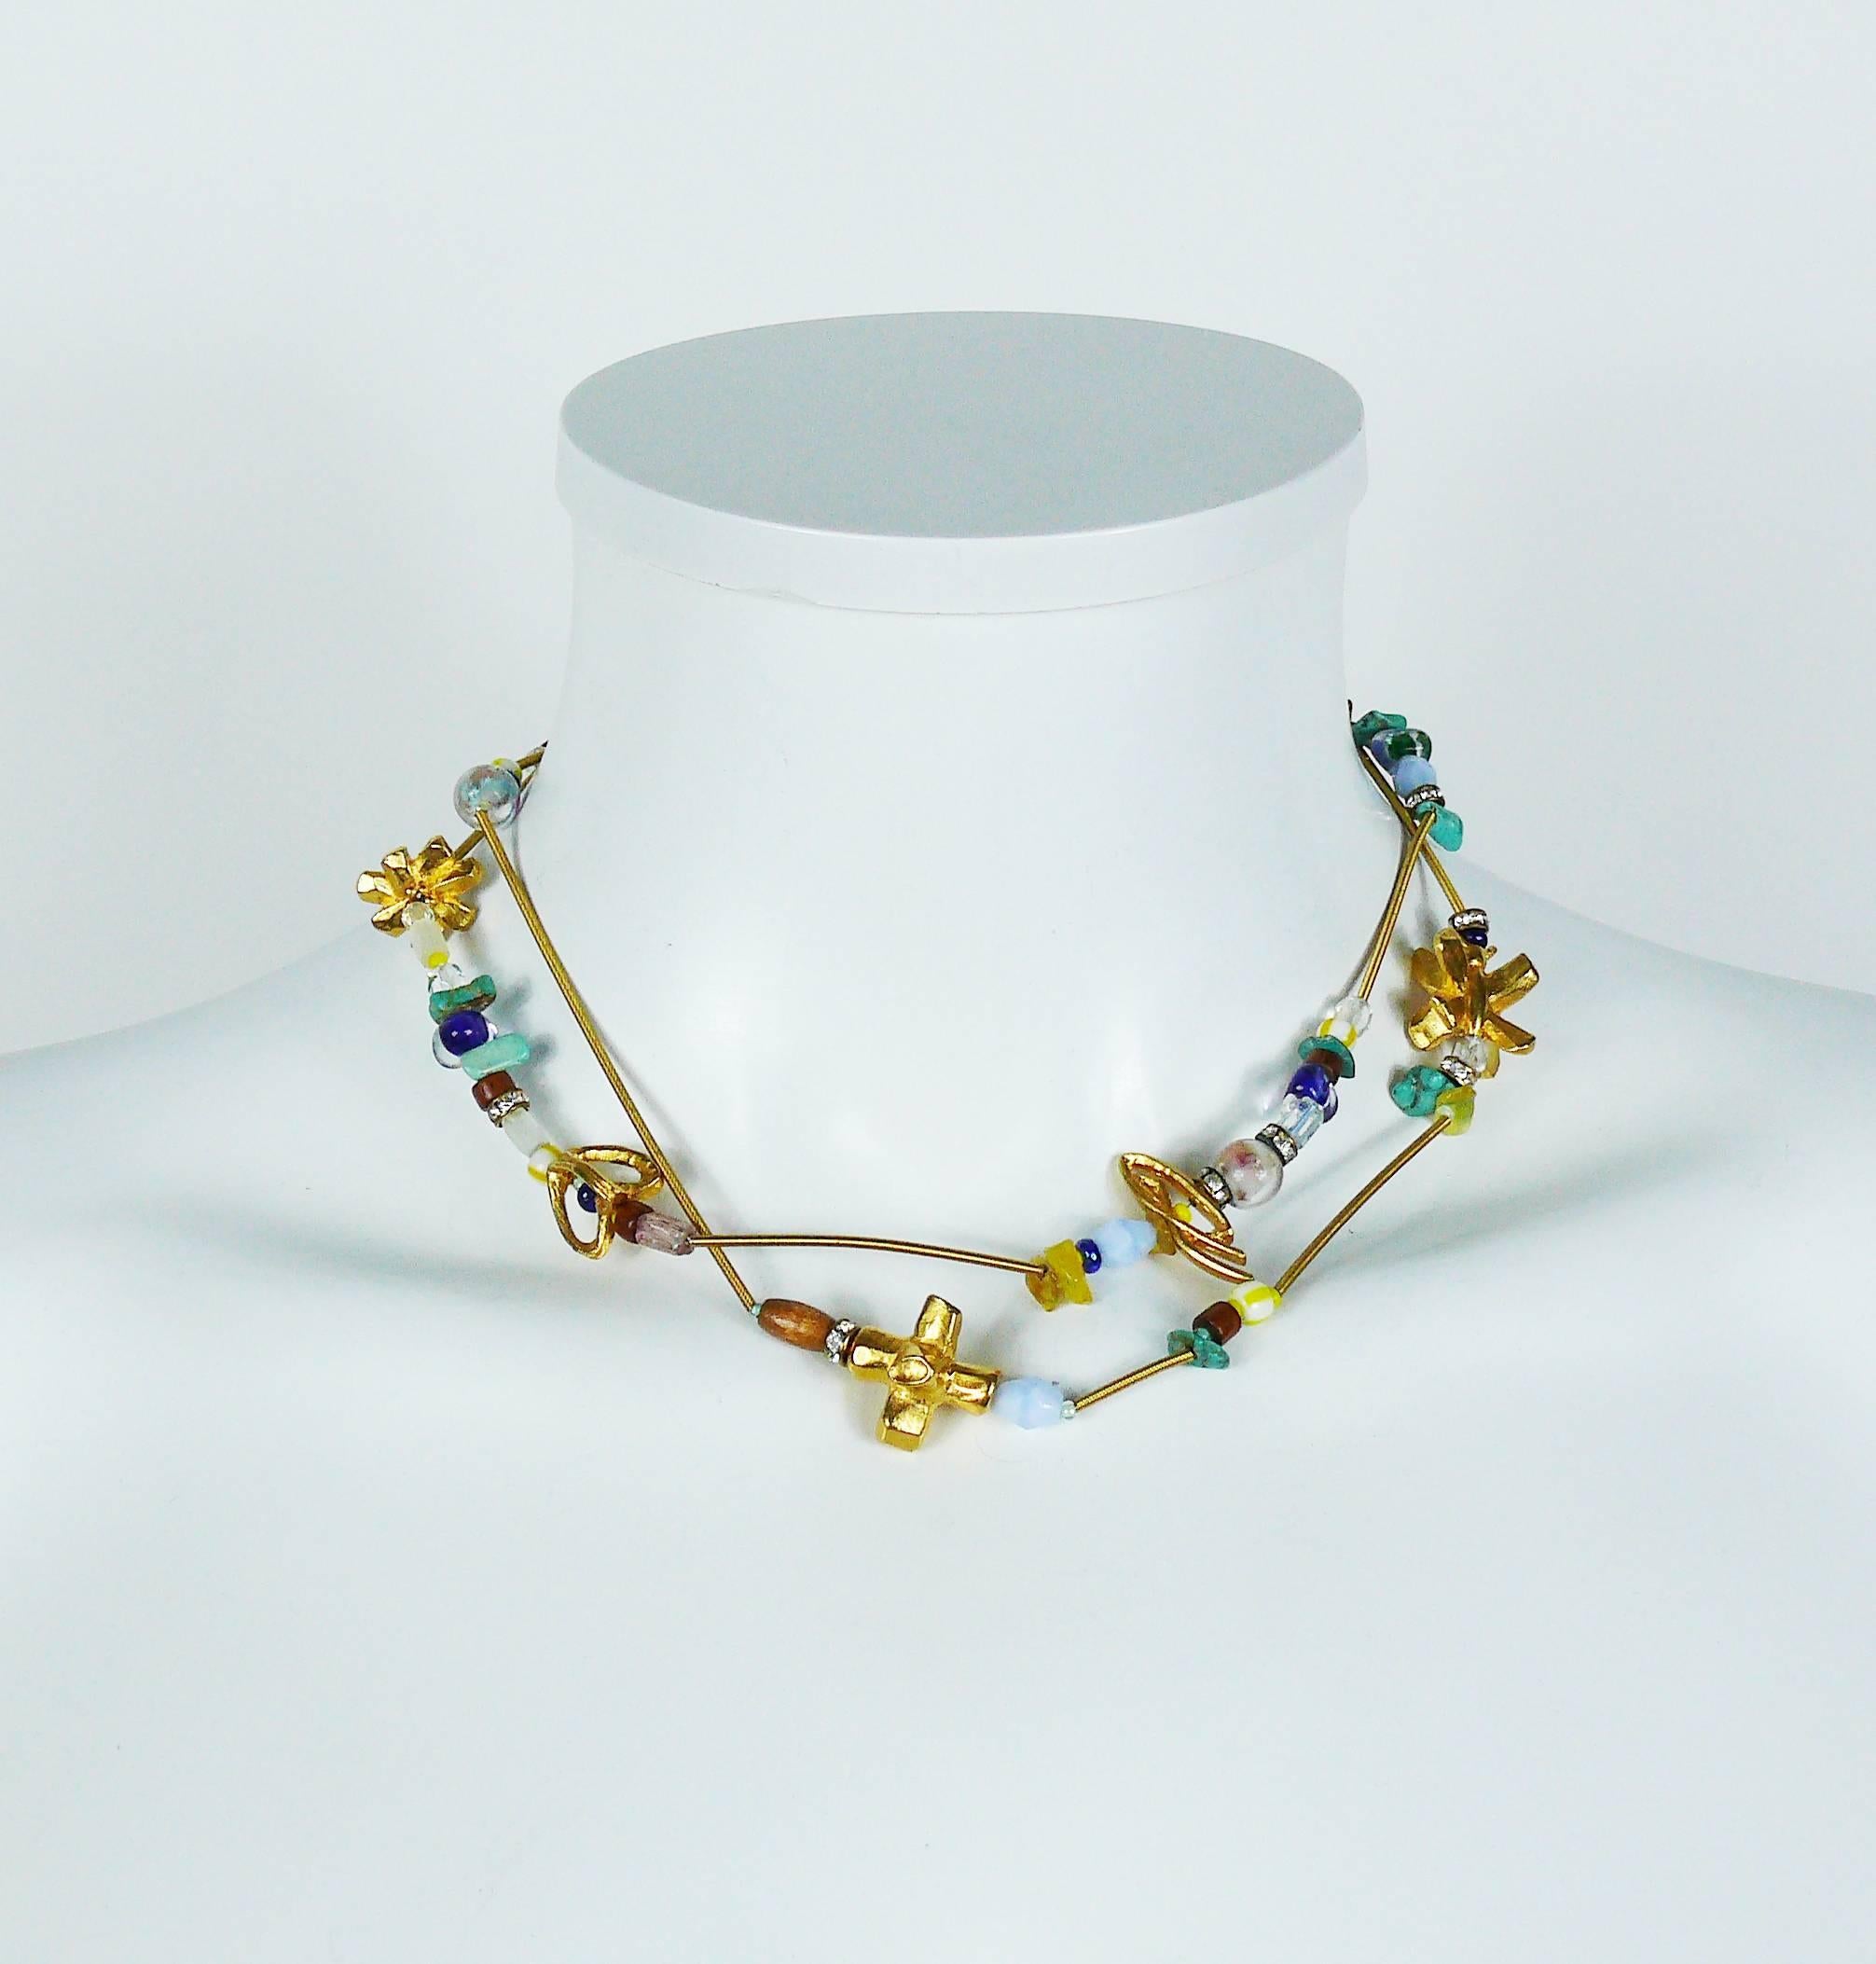 CHRISTIAN LACROIX vintage two strand gold toned necklace featuring glass beads, faux turquoises and crystal rondelles embellishement.

Marked CHRISTIAN LACROIX CL Made in France.

Indicative measurements : max. length approx. 39.5 cm (15.55 inches)